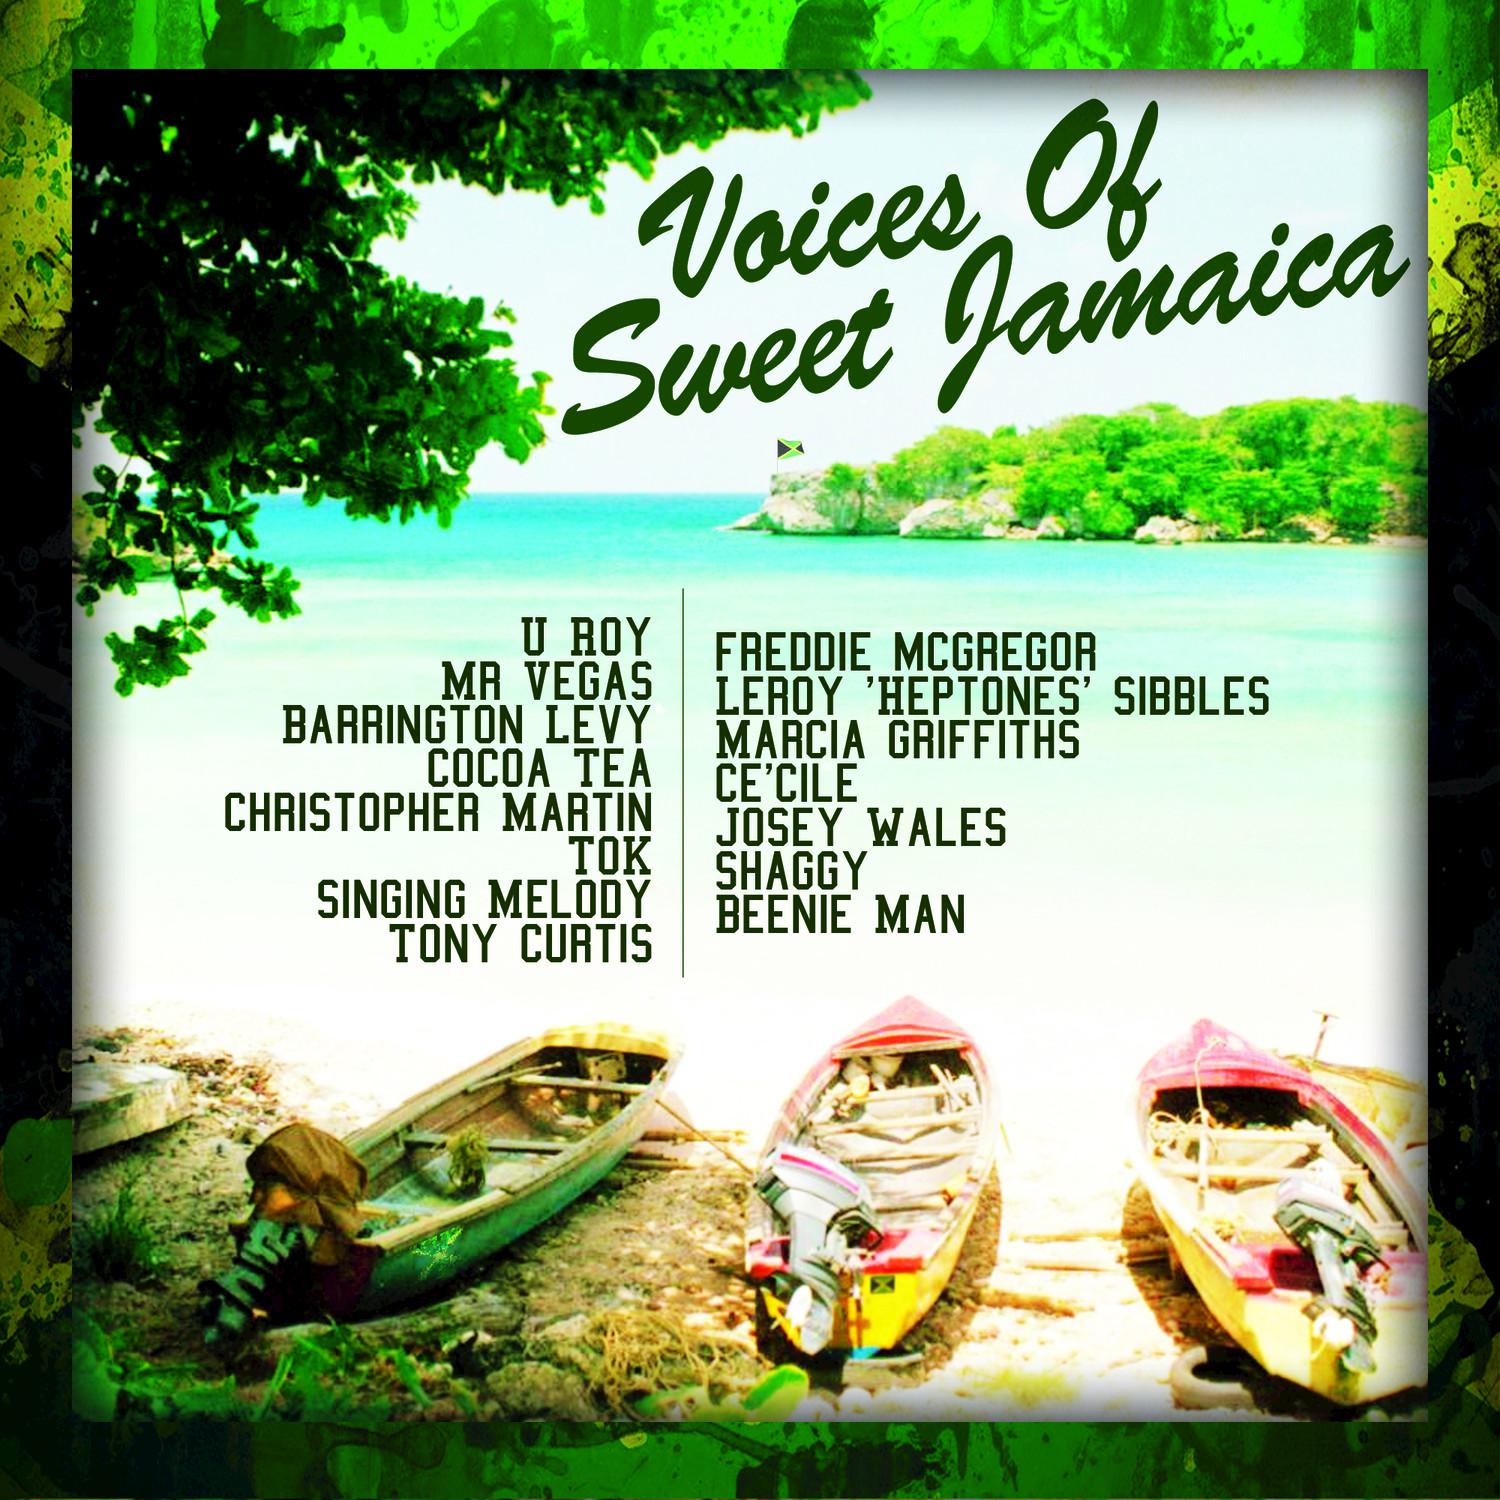 Mr Vegas - The Voices Of Sweet Jamaica (All Star Remix)